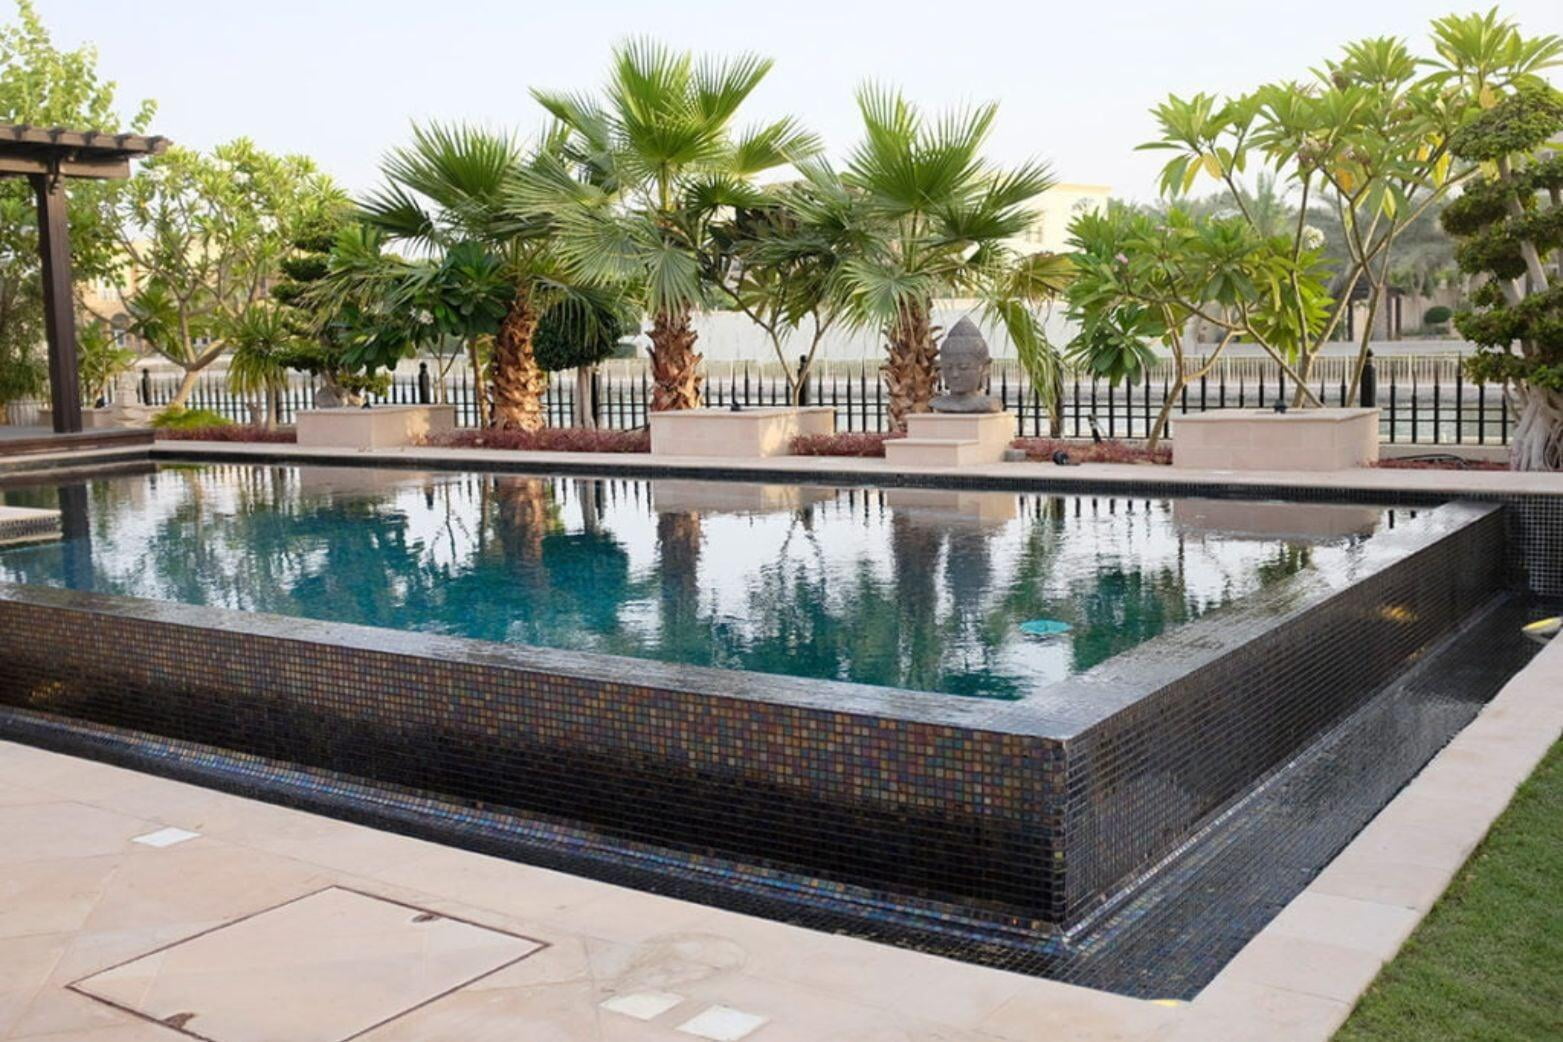 A concrete pool with vanishing edge constructed by Silver Fox